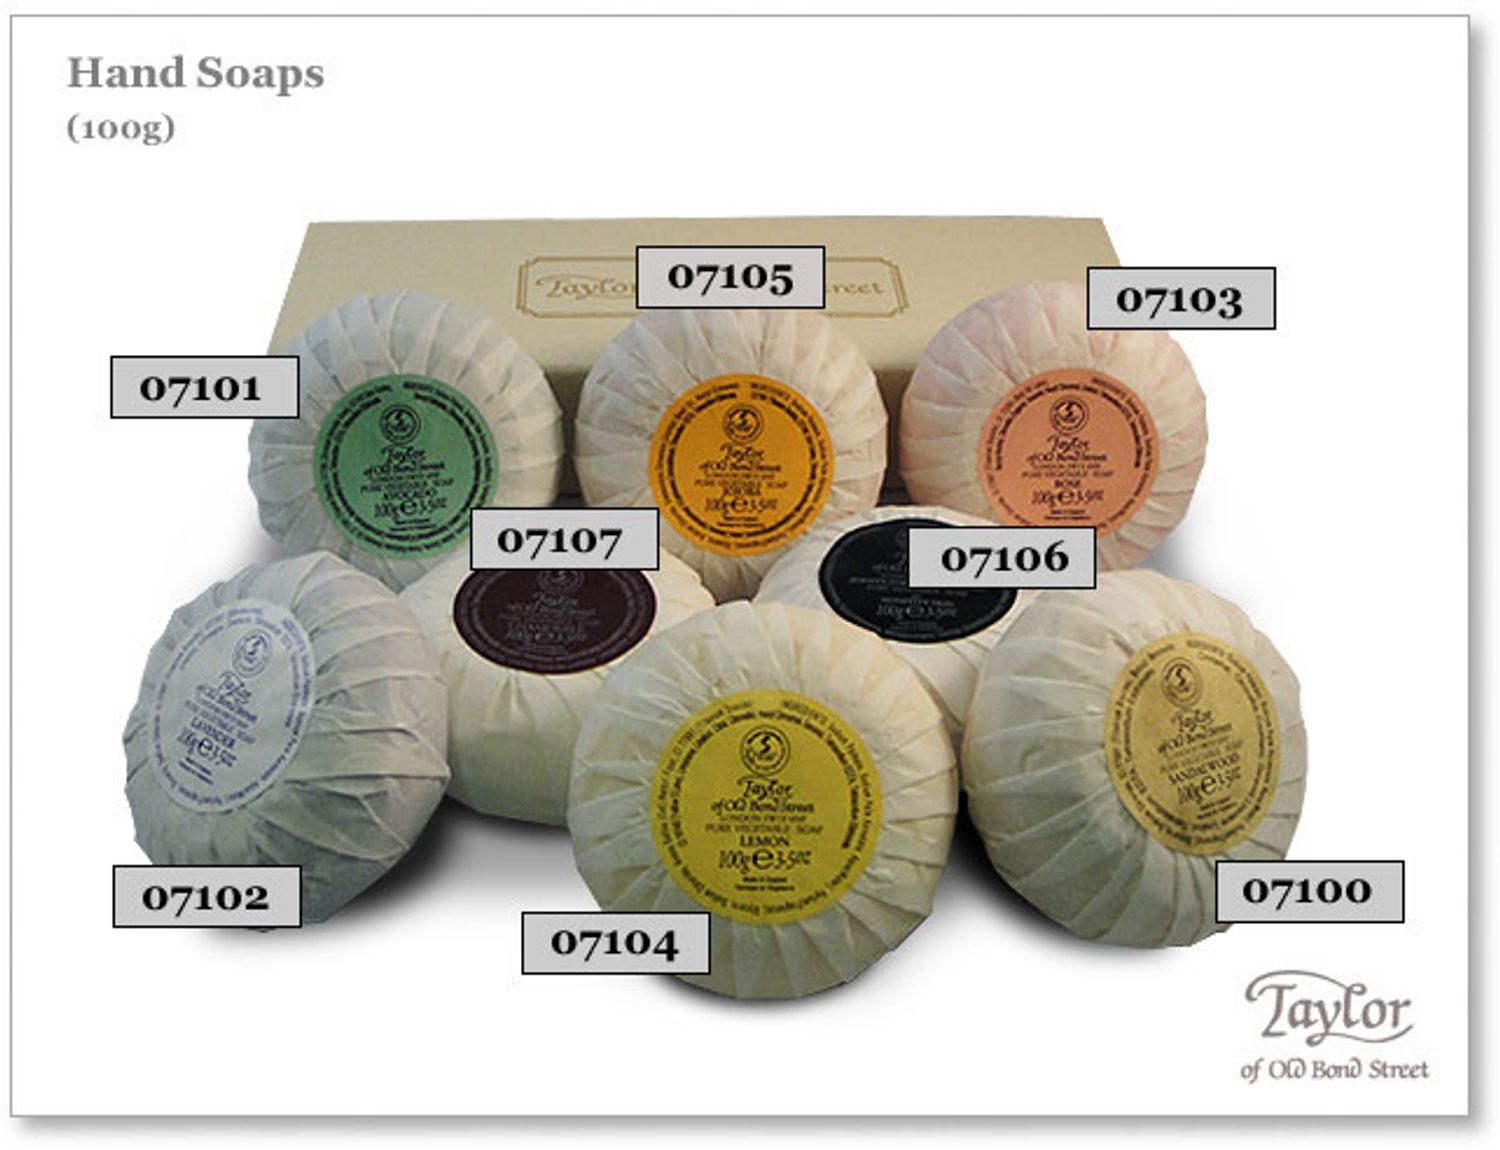 Taylor of Old Street Collection - Soap Street (100g) Skin Discontinued Jermyn oz for Bond Hand KnifeCenter - 07106 - 3.5 Sensitive